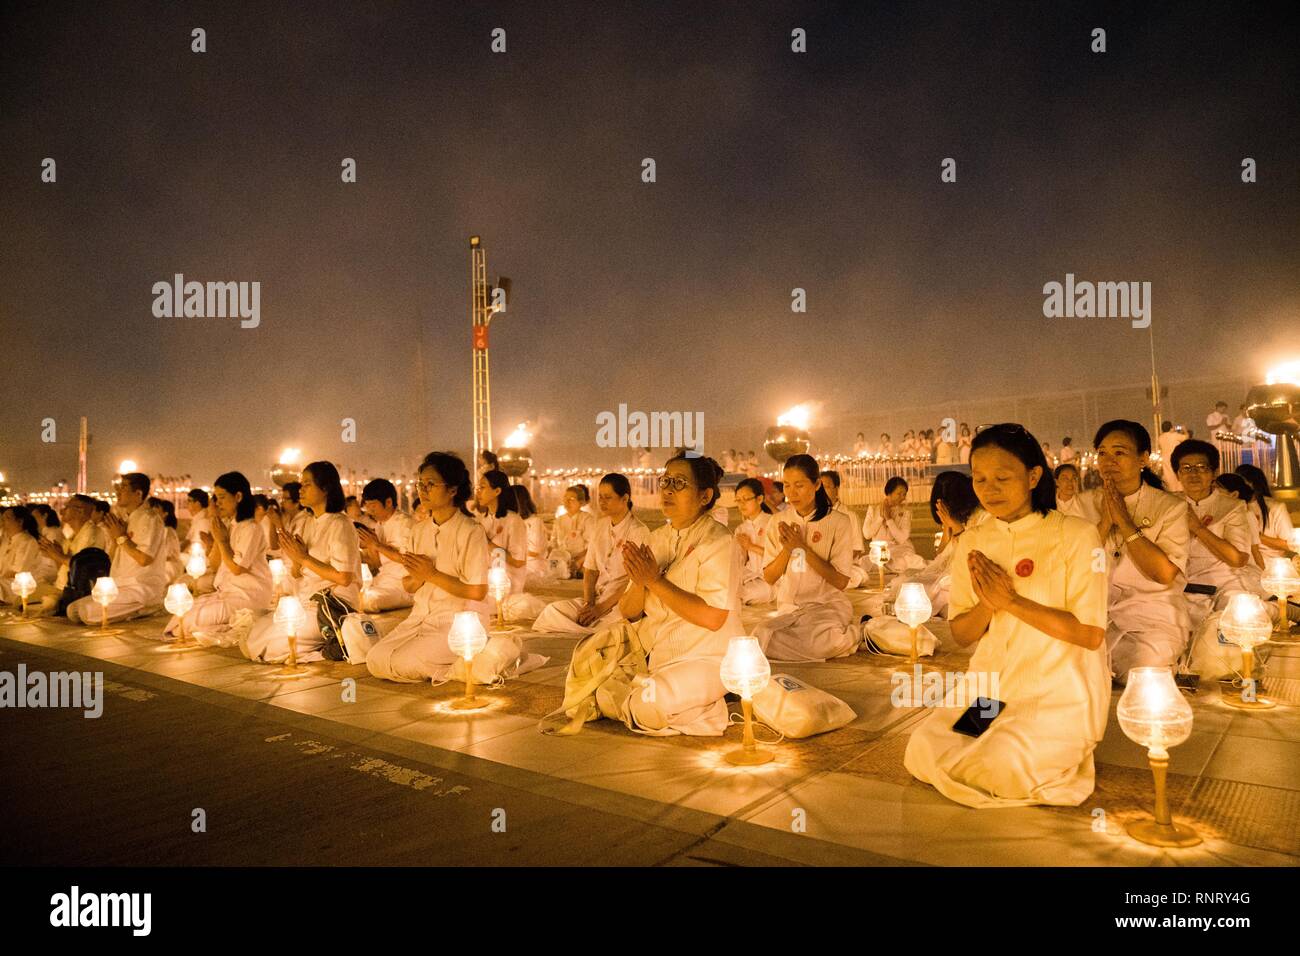 Devotees seen meditating with their lanterns during the yearly Makha Bucha ceremony. Buddhist devotees celebrate the annual festival of Makha Bucha, one of the most important day for buddhists around the world. More than a thousand monks and hundred of thousand devotees were gathering at Dhammakaya Temple in Bangkok to attend the lighting ceremony. Stock Photo